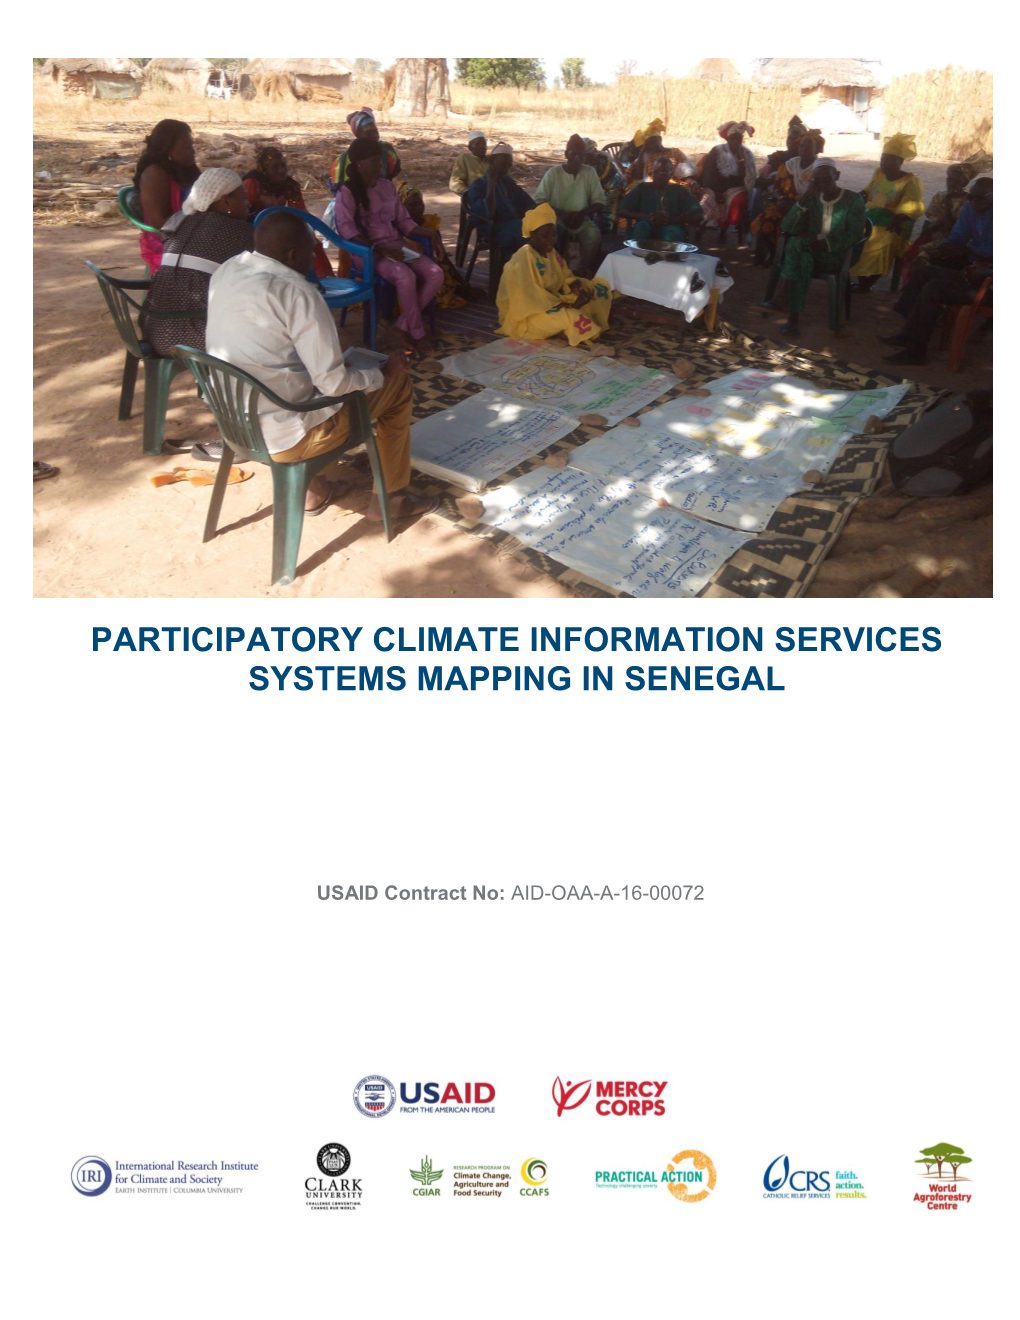 Participatory Climate Information Services Systems Mapping in Senegal